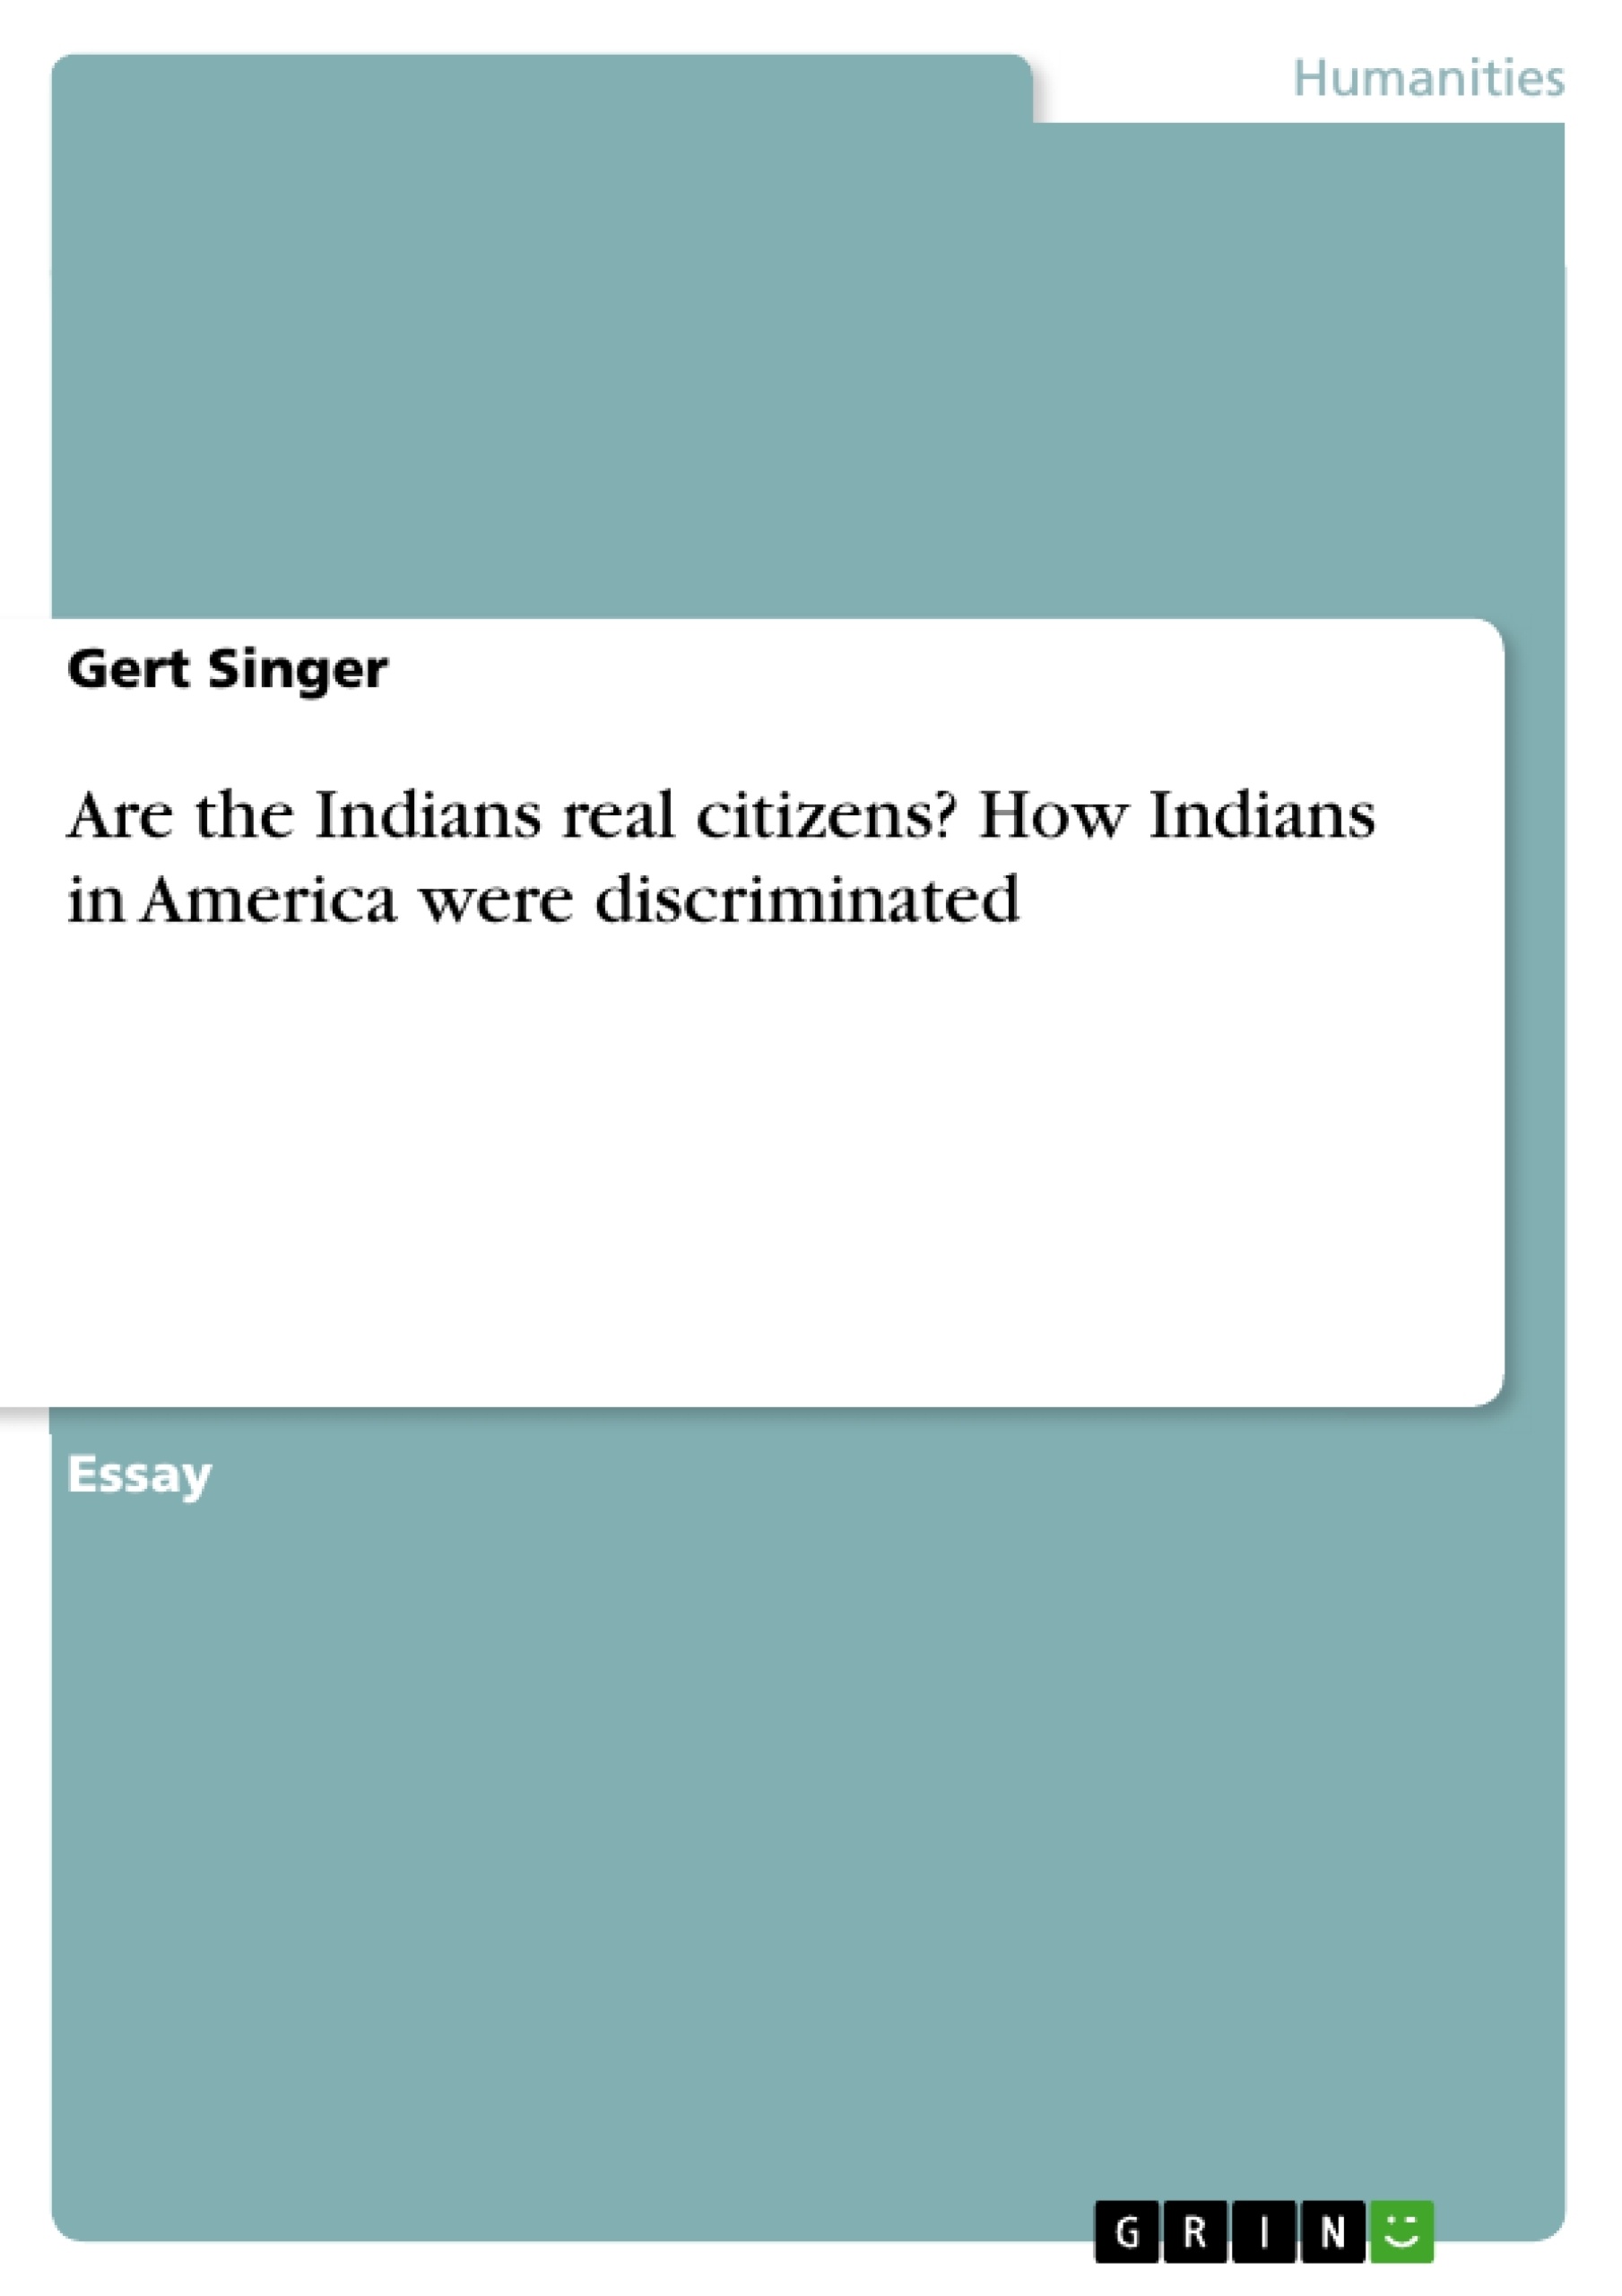 Título: Are the Indians real citizens? How Indians in America were discriminated